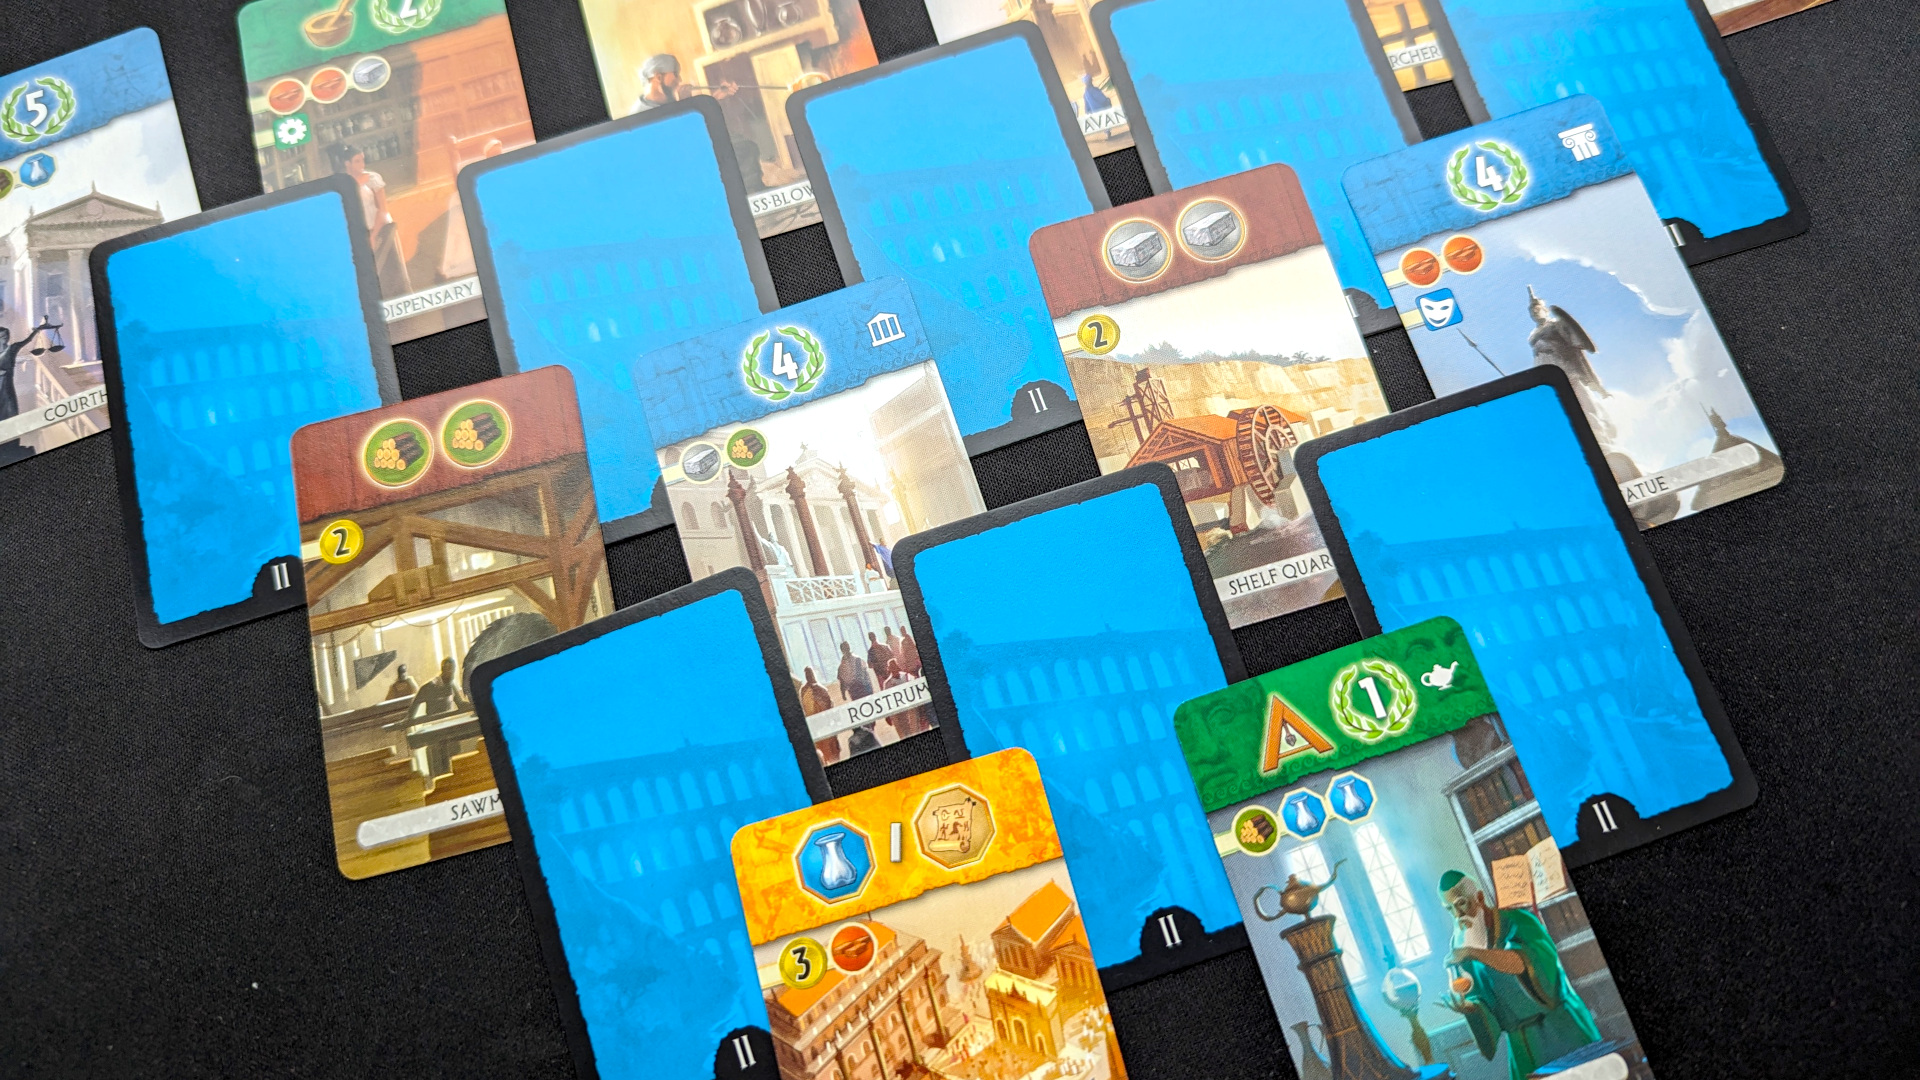 7 Wonders Duel review - author photo showing the game's cards "Structure" laid out on a table